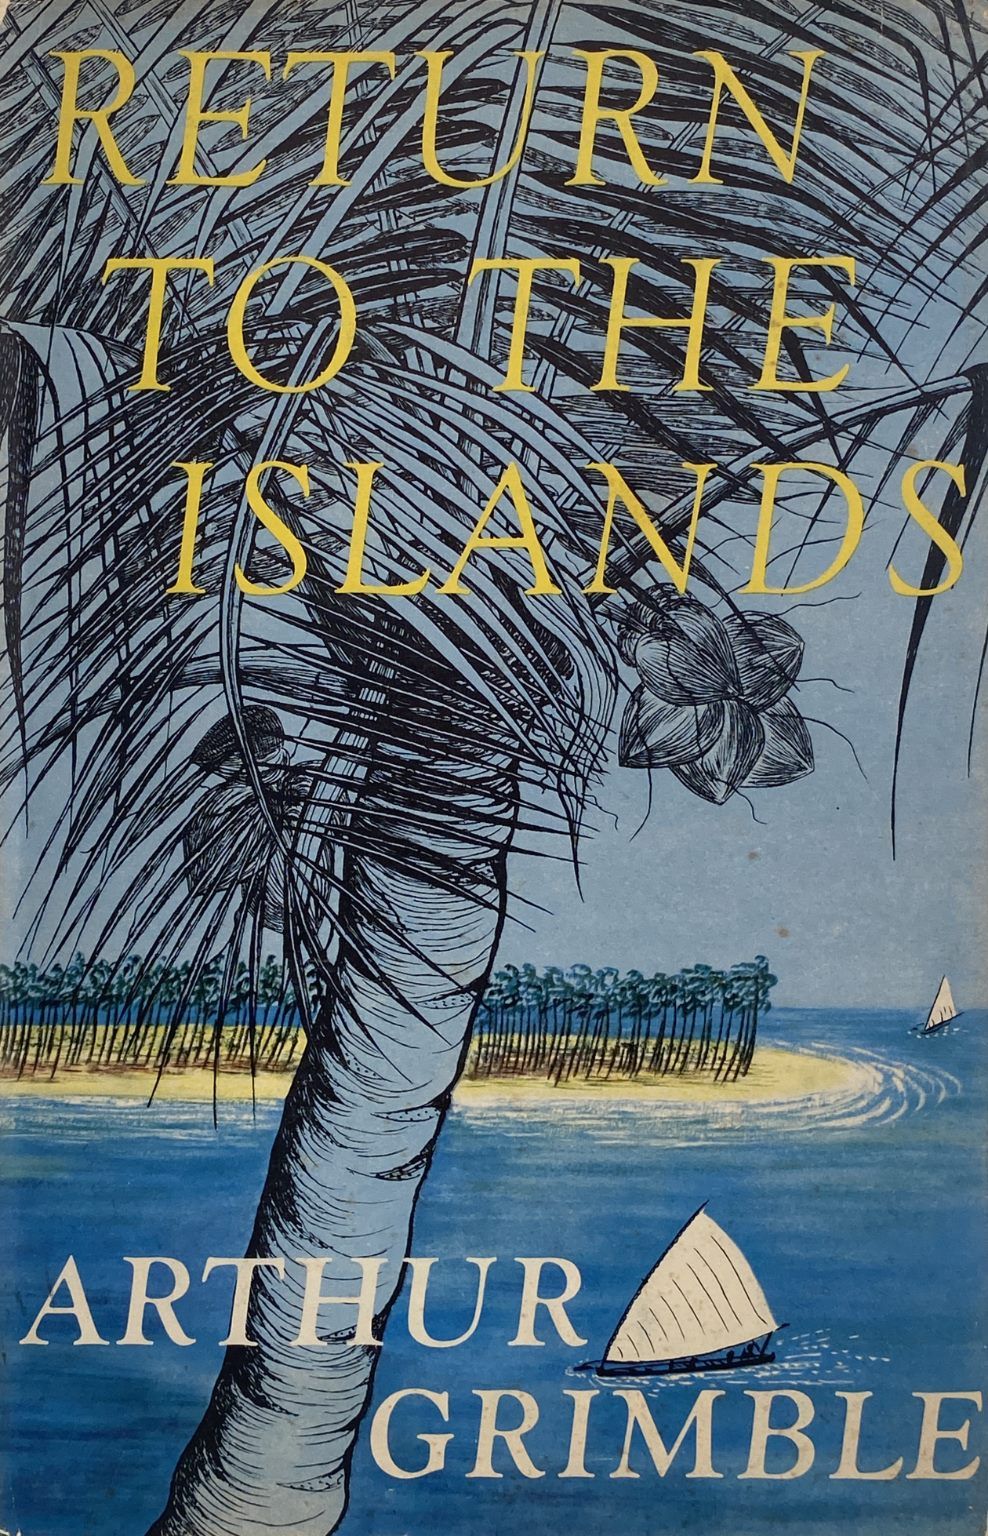 RETURN TO THE ISLANDS